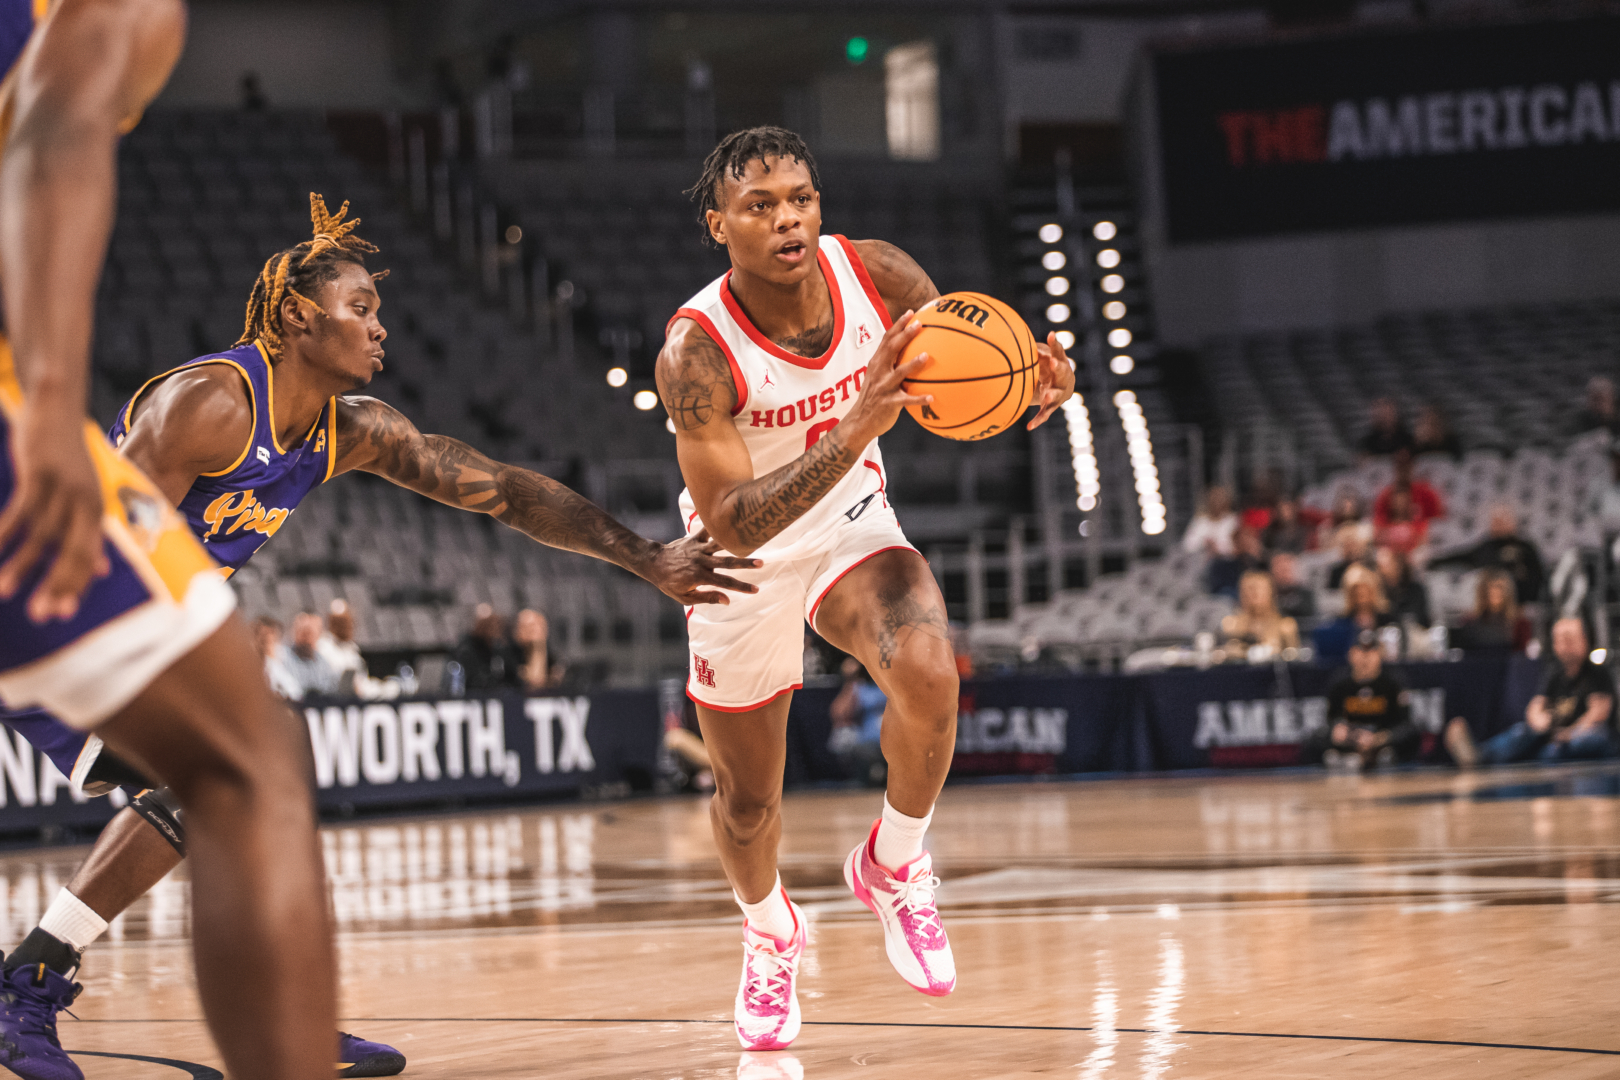 Marcus Sasser finished one-point shy of his career-high, scoring 30 in No. 1 UH's win over ECU in the AAC Tournament quarterfinals. | Sean Thomas/Sean.htxphoto